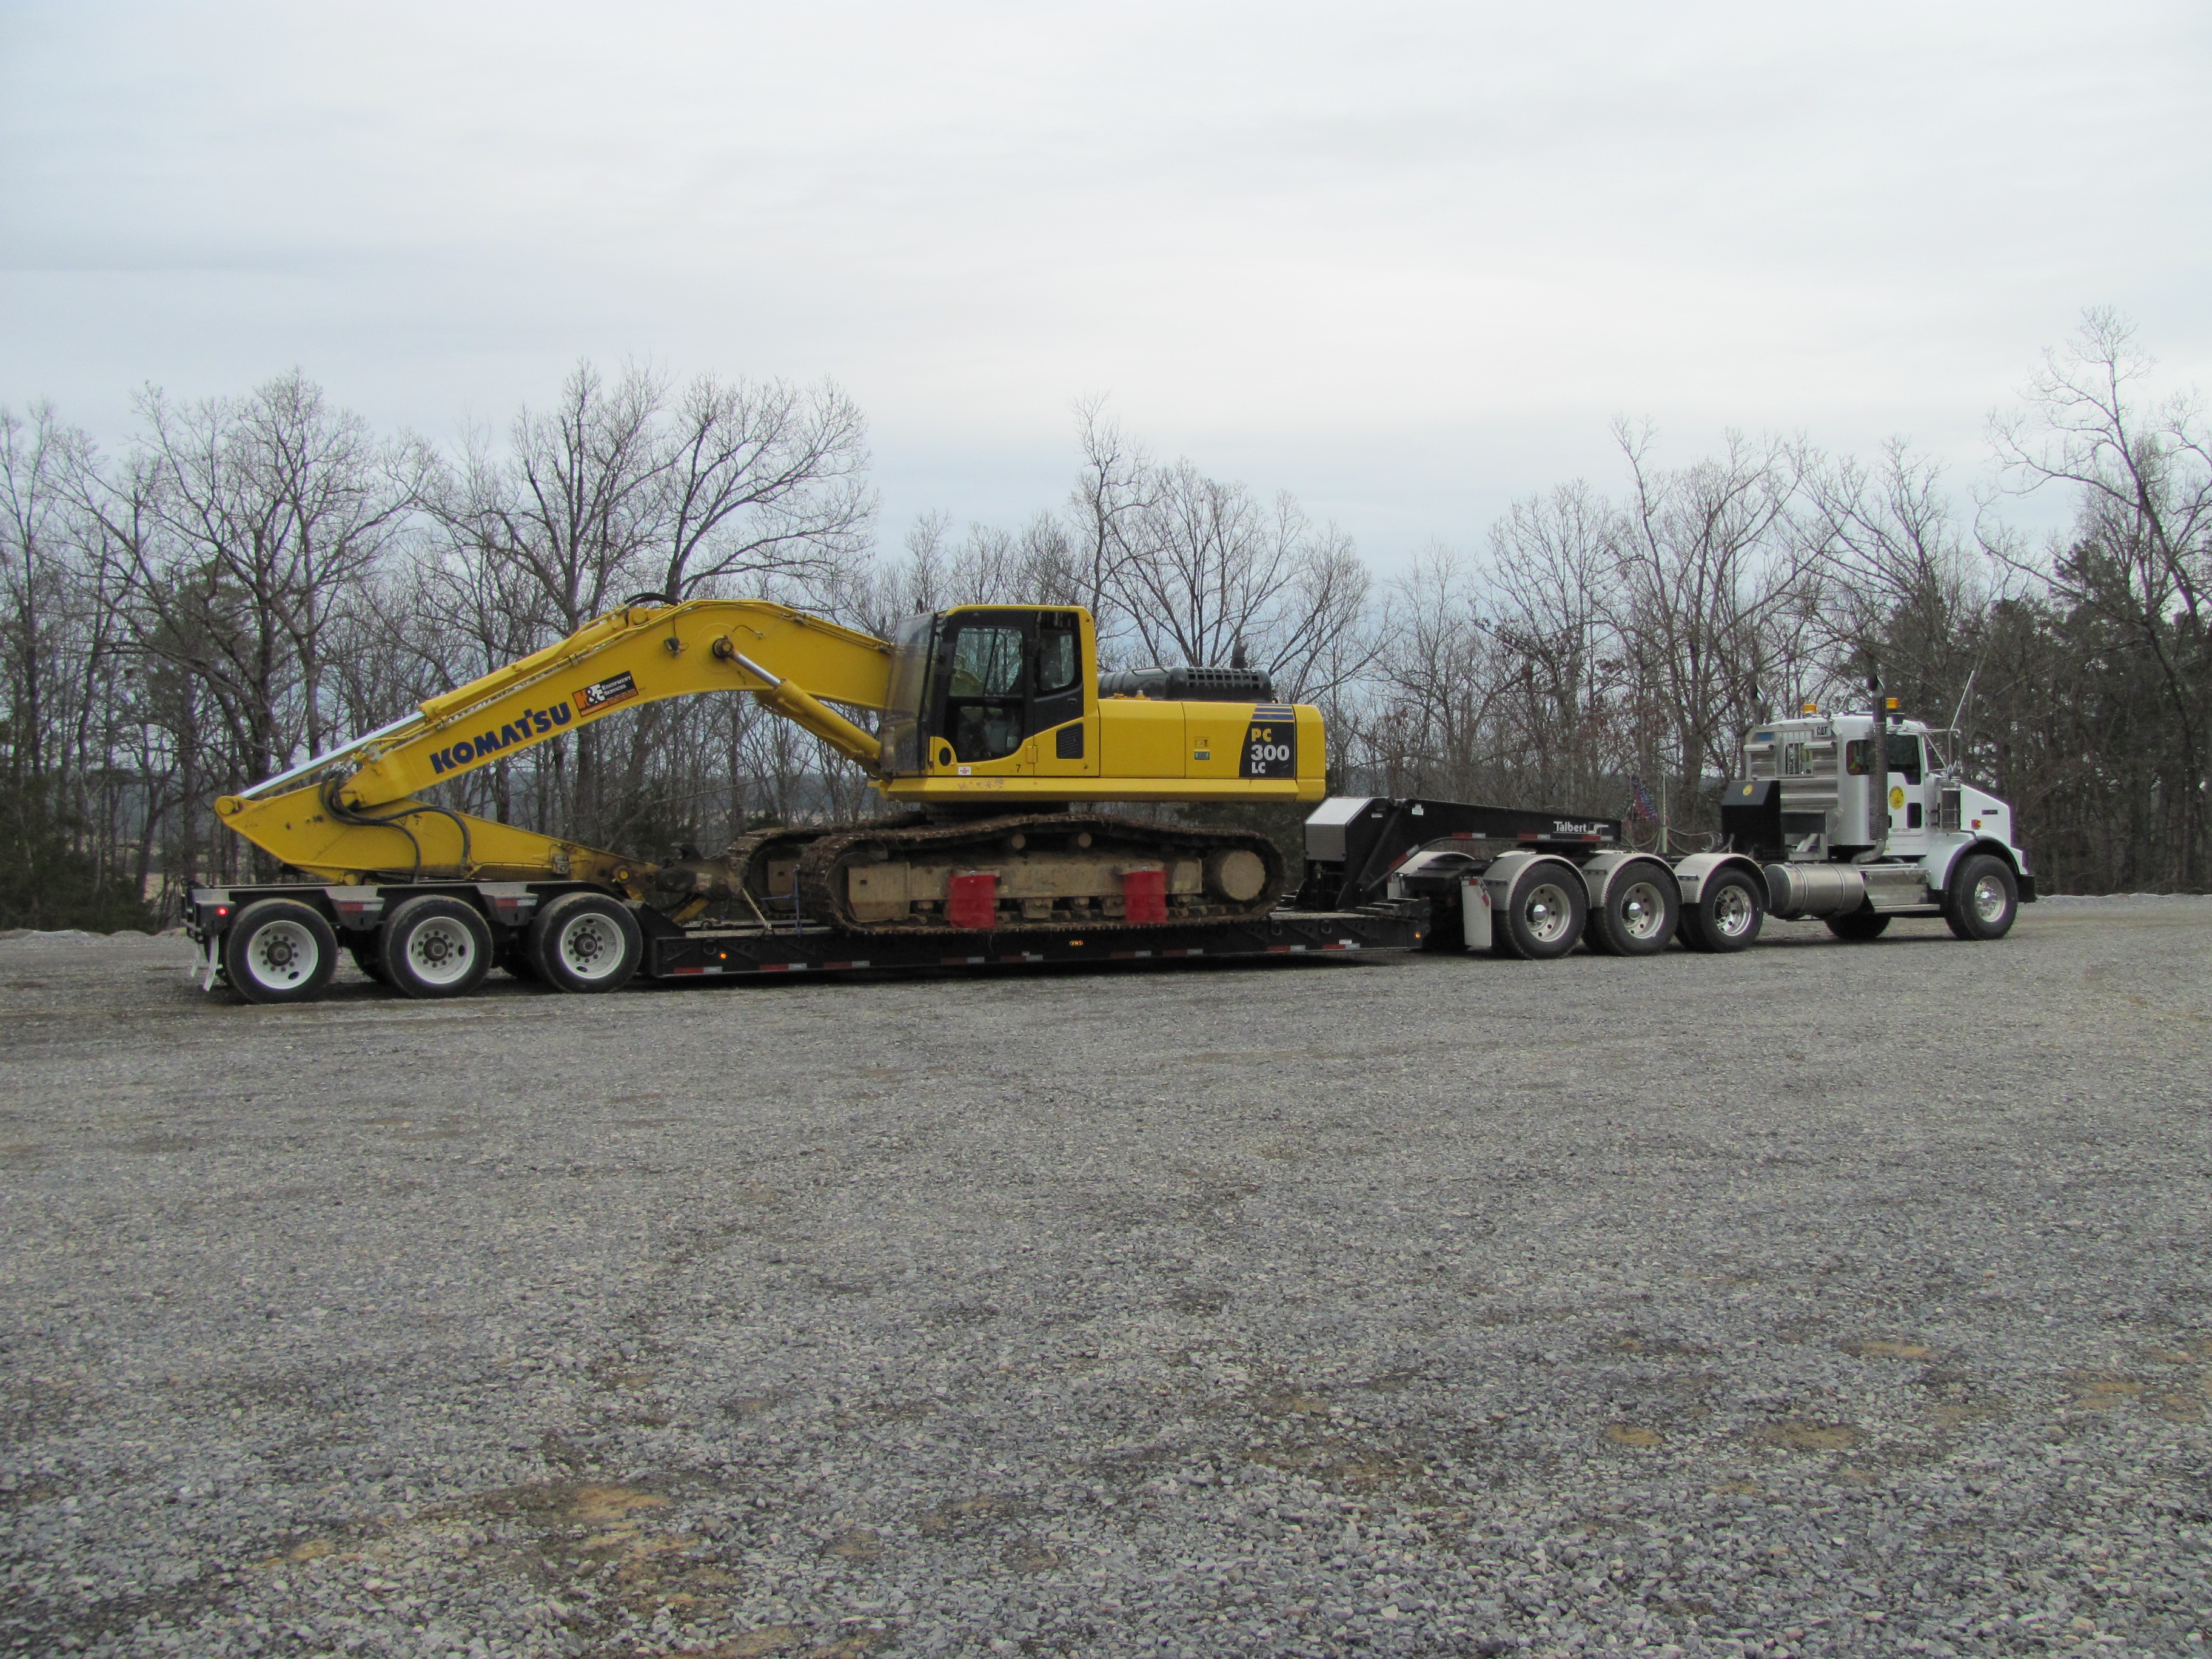 There are lots of variables when it comes to finding the right trailer for hauling earthmoving equipment. Make the decision easier by following these five tips from Talbert Manufacturing